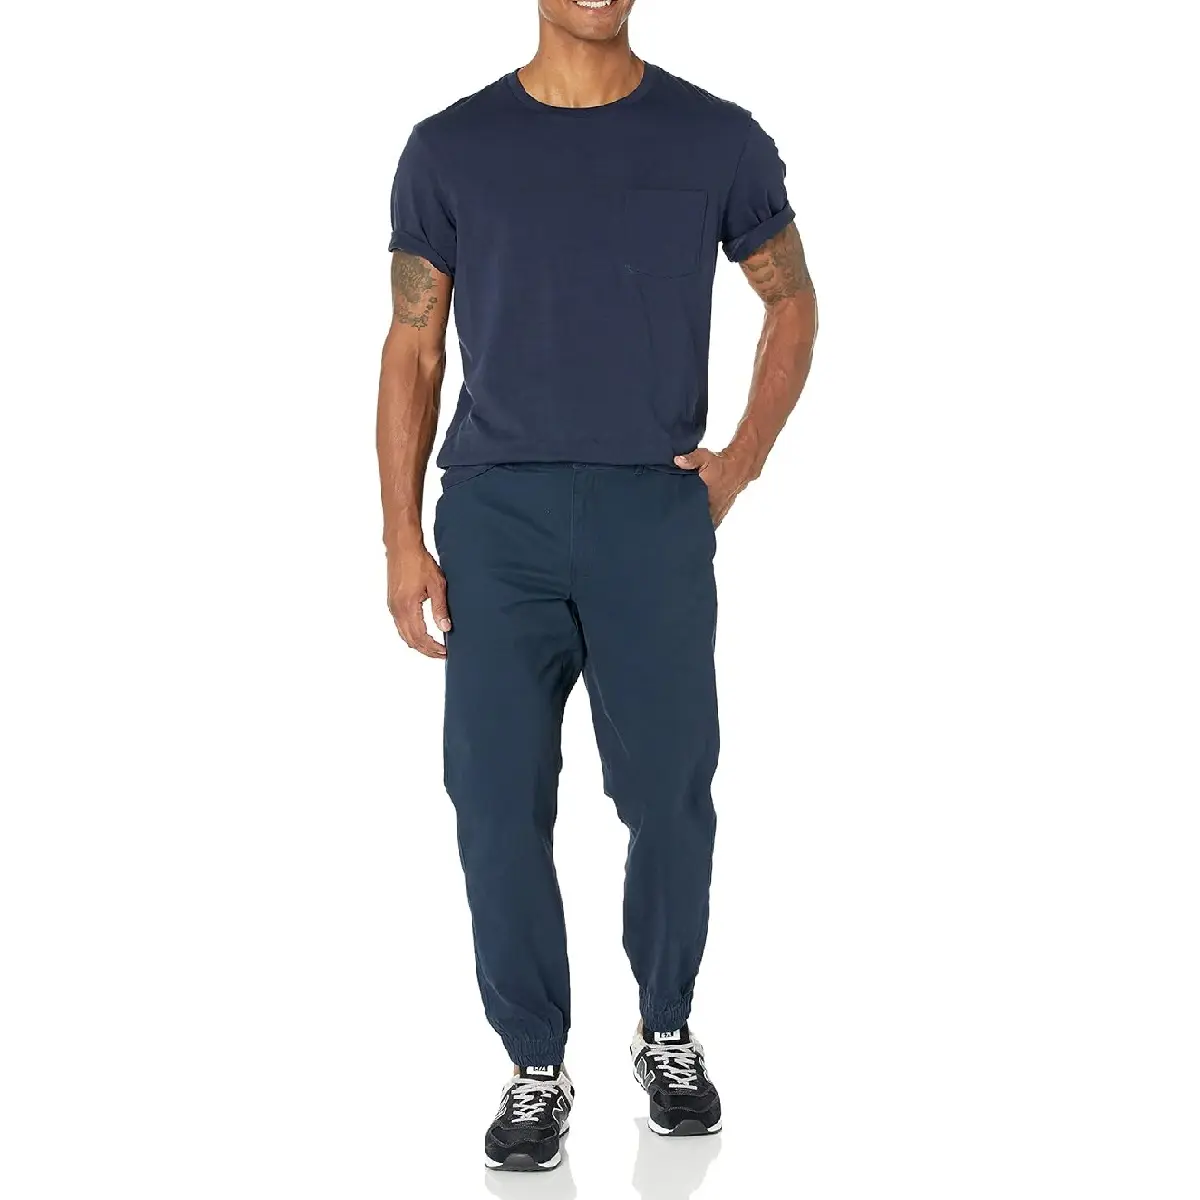 High Quality Casual Slim Fit Solid Color Mens Cotton Twill Washed Jogger Fashion Pants with Drawstring From Bangladesh Factory